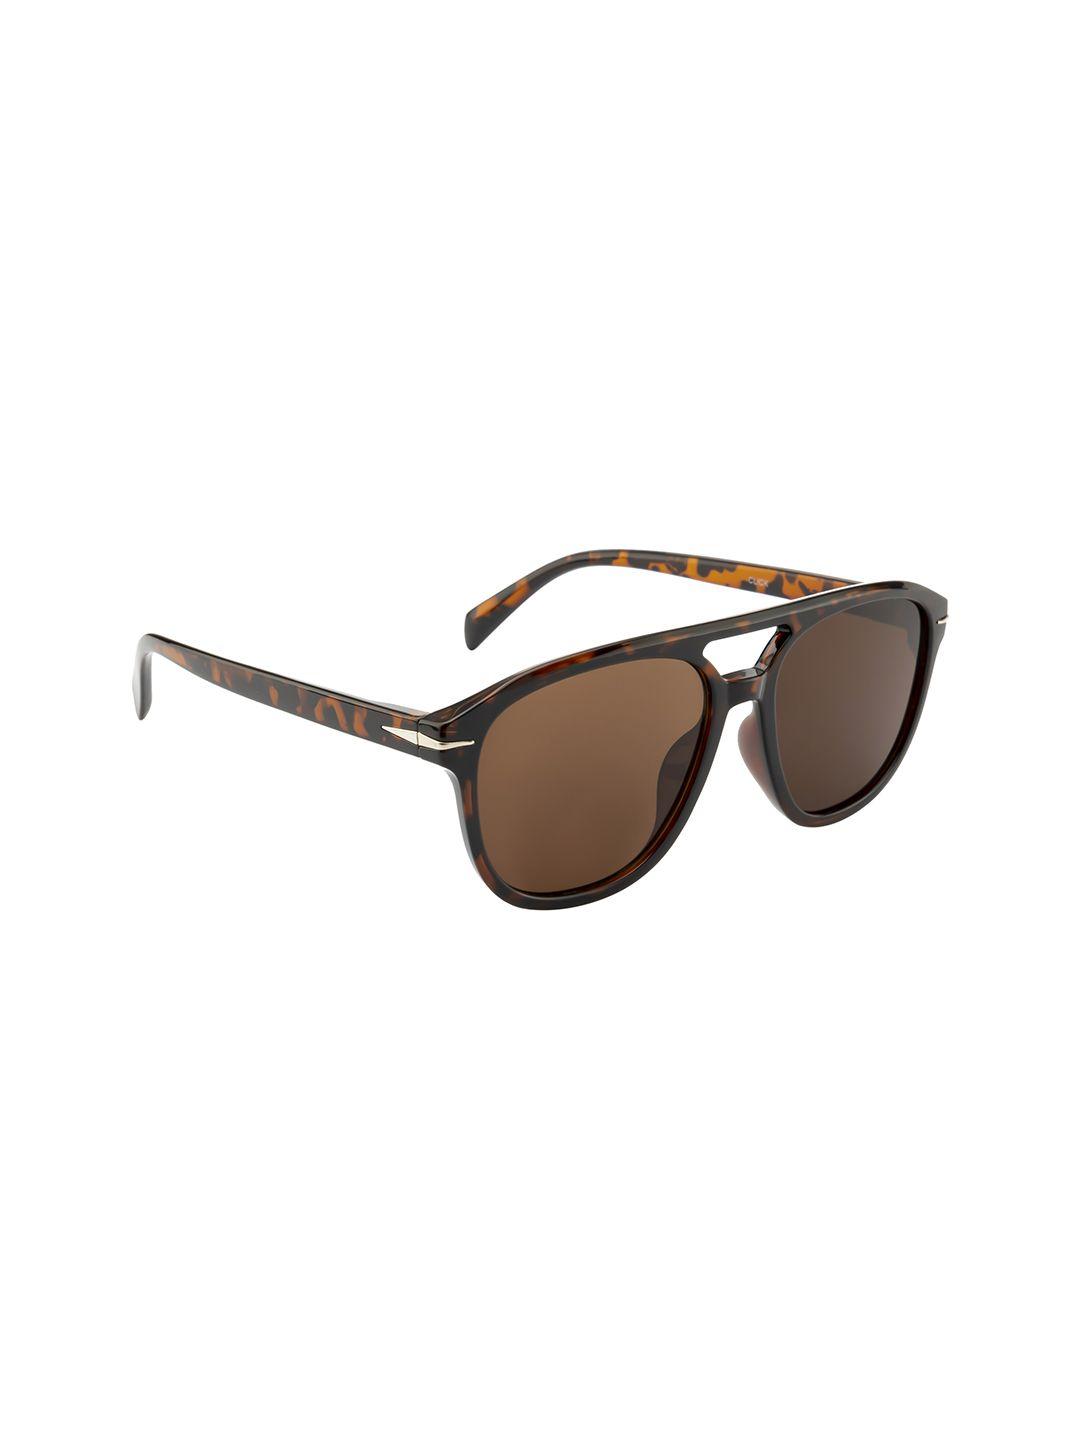 roadster-lens-&-square-sunglasses-with-uv-protected-sunglasses-with-hard-case-rd-m22573